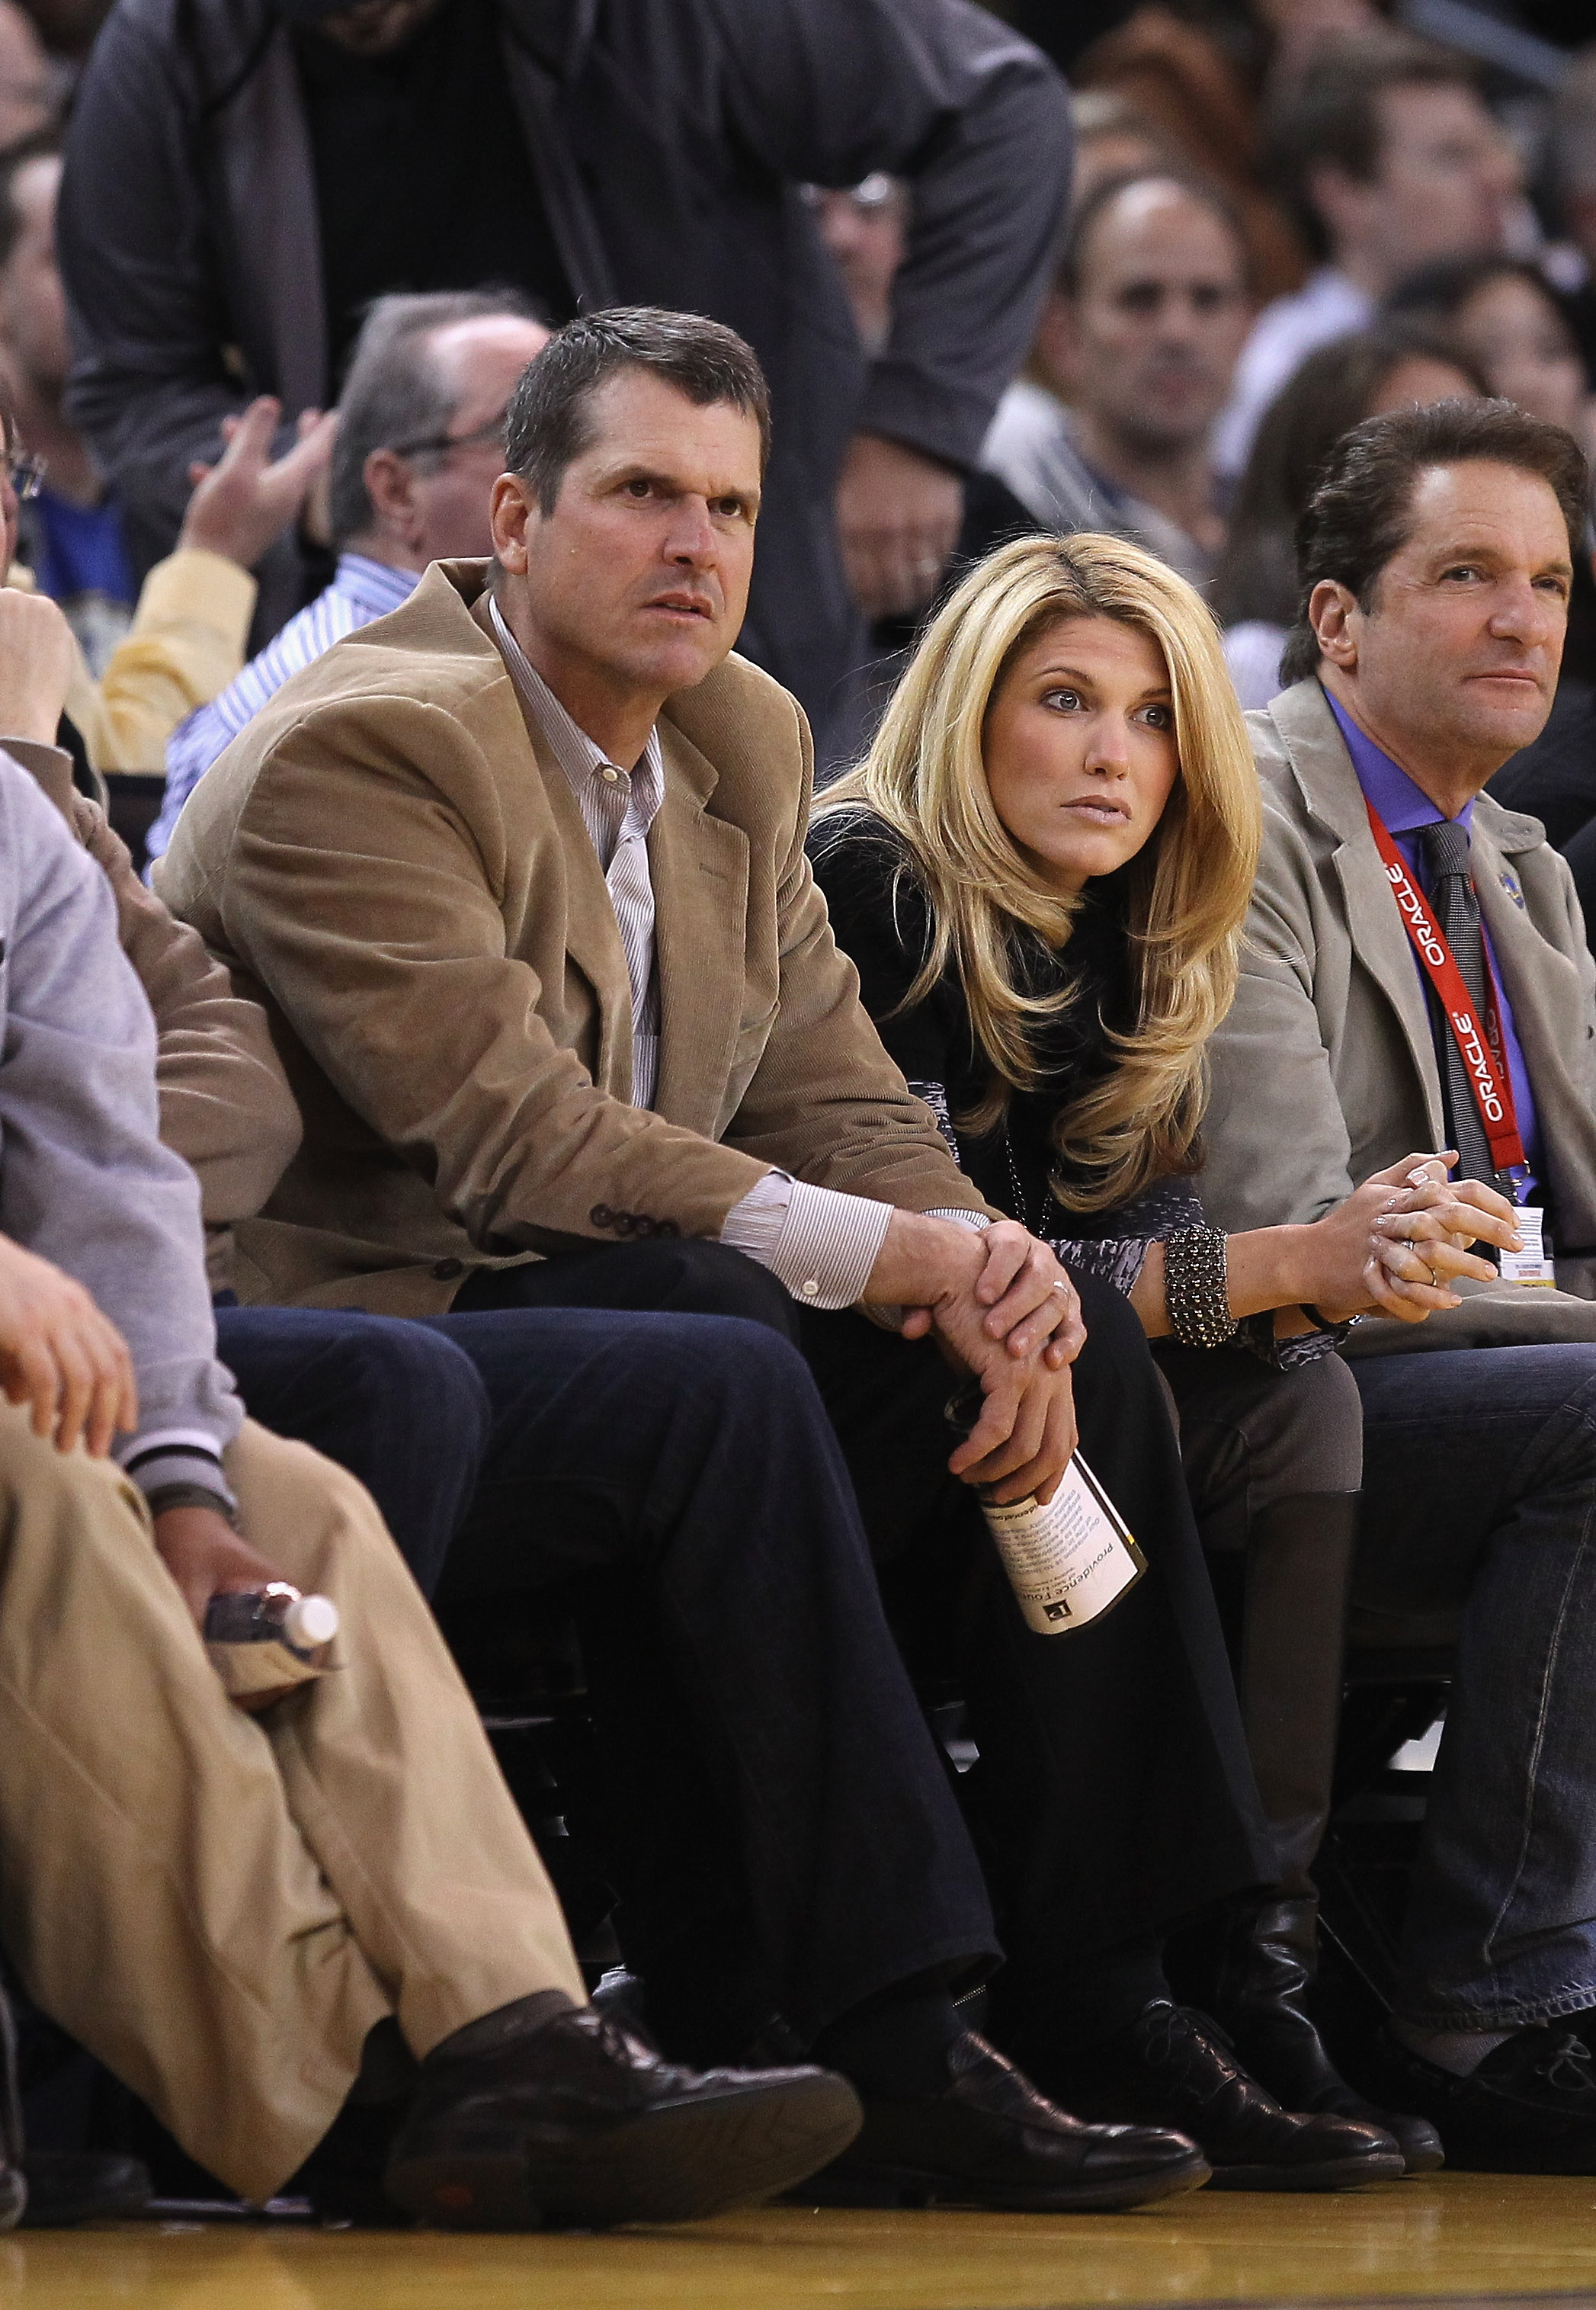 Jim Harbaugh and his wife, Sarah, watch a game at Oracle Arena on February 15, 2012, in Oakland, California | Source: Getty Images